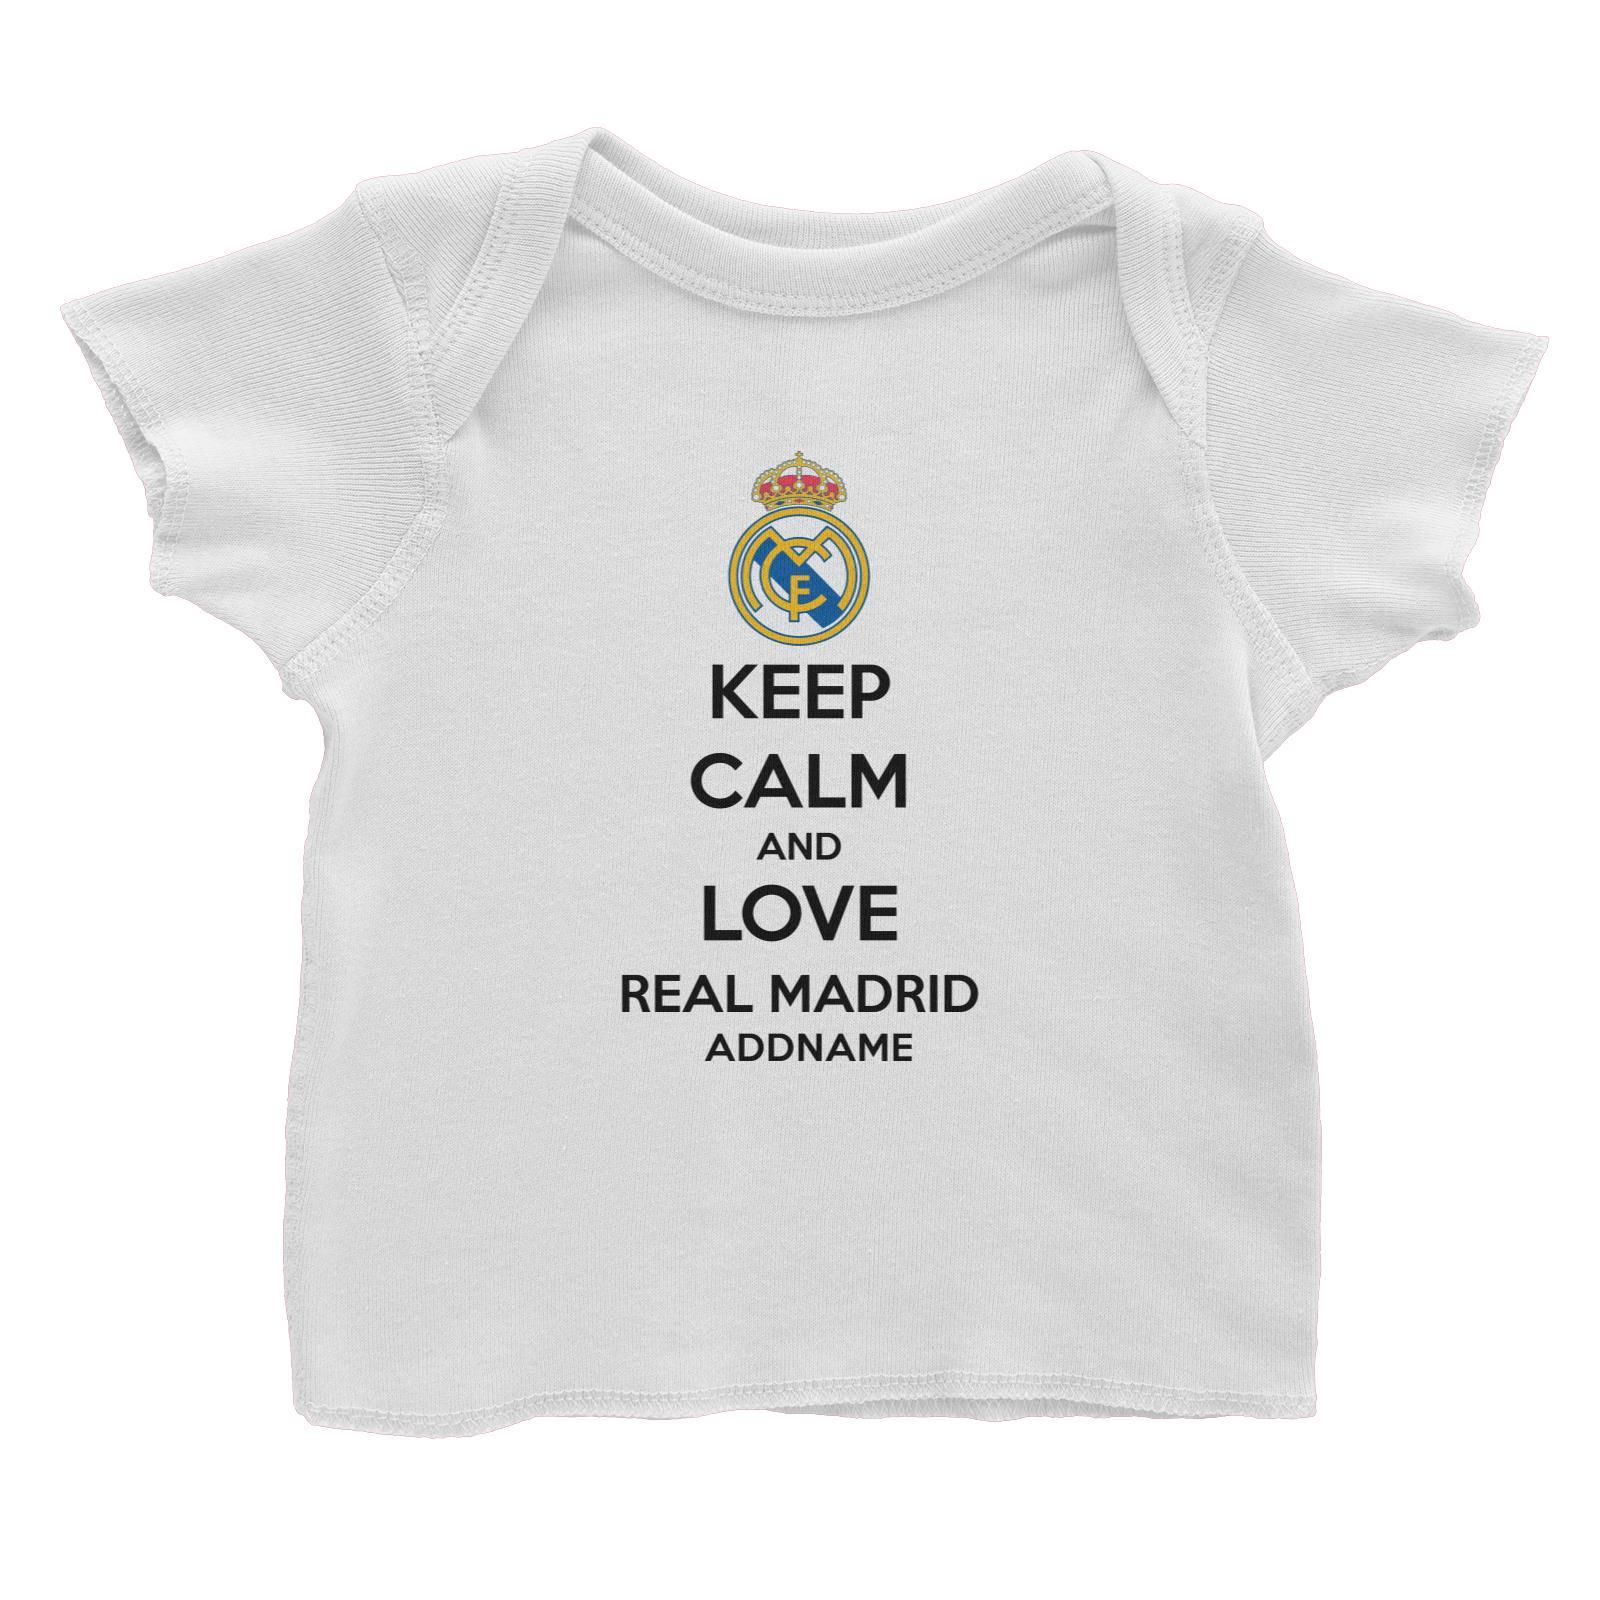 Real Madrid Football Keep Calm And Love Series Addname Baby T-Shirt